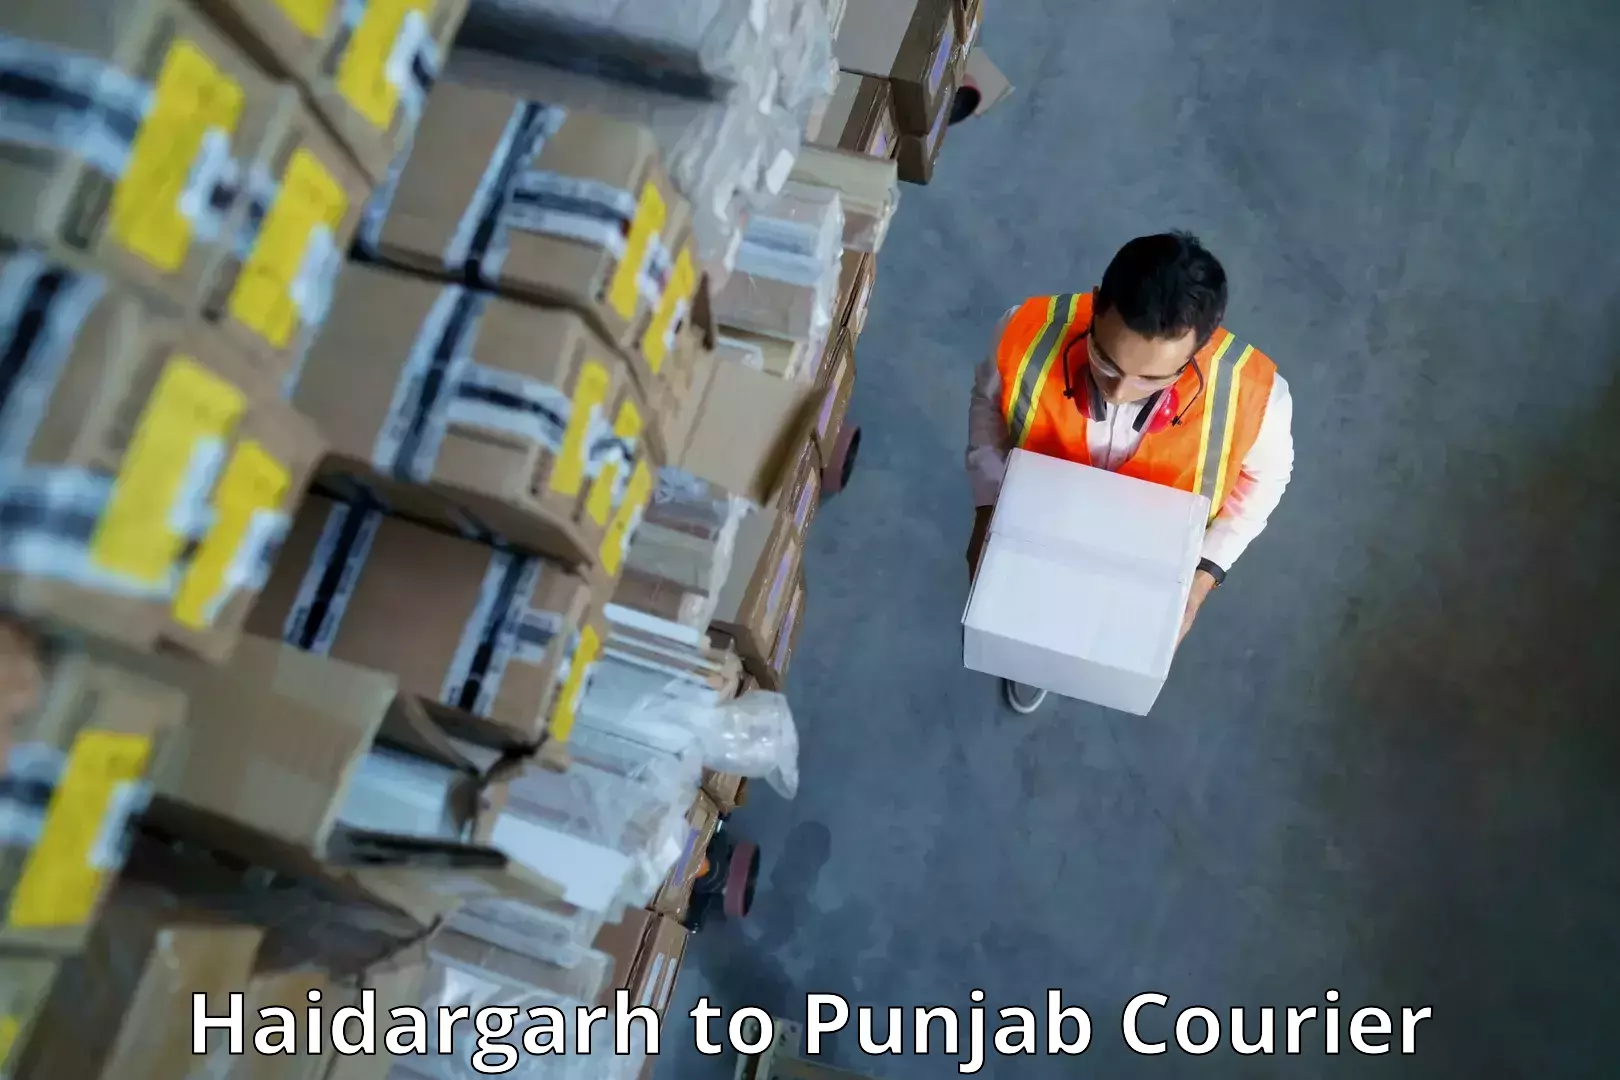 High-quality delivery services Haidargarh to Mohali